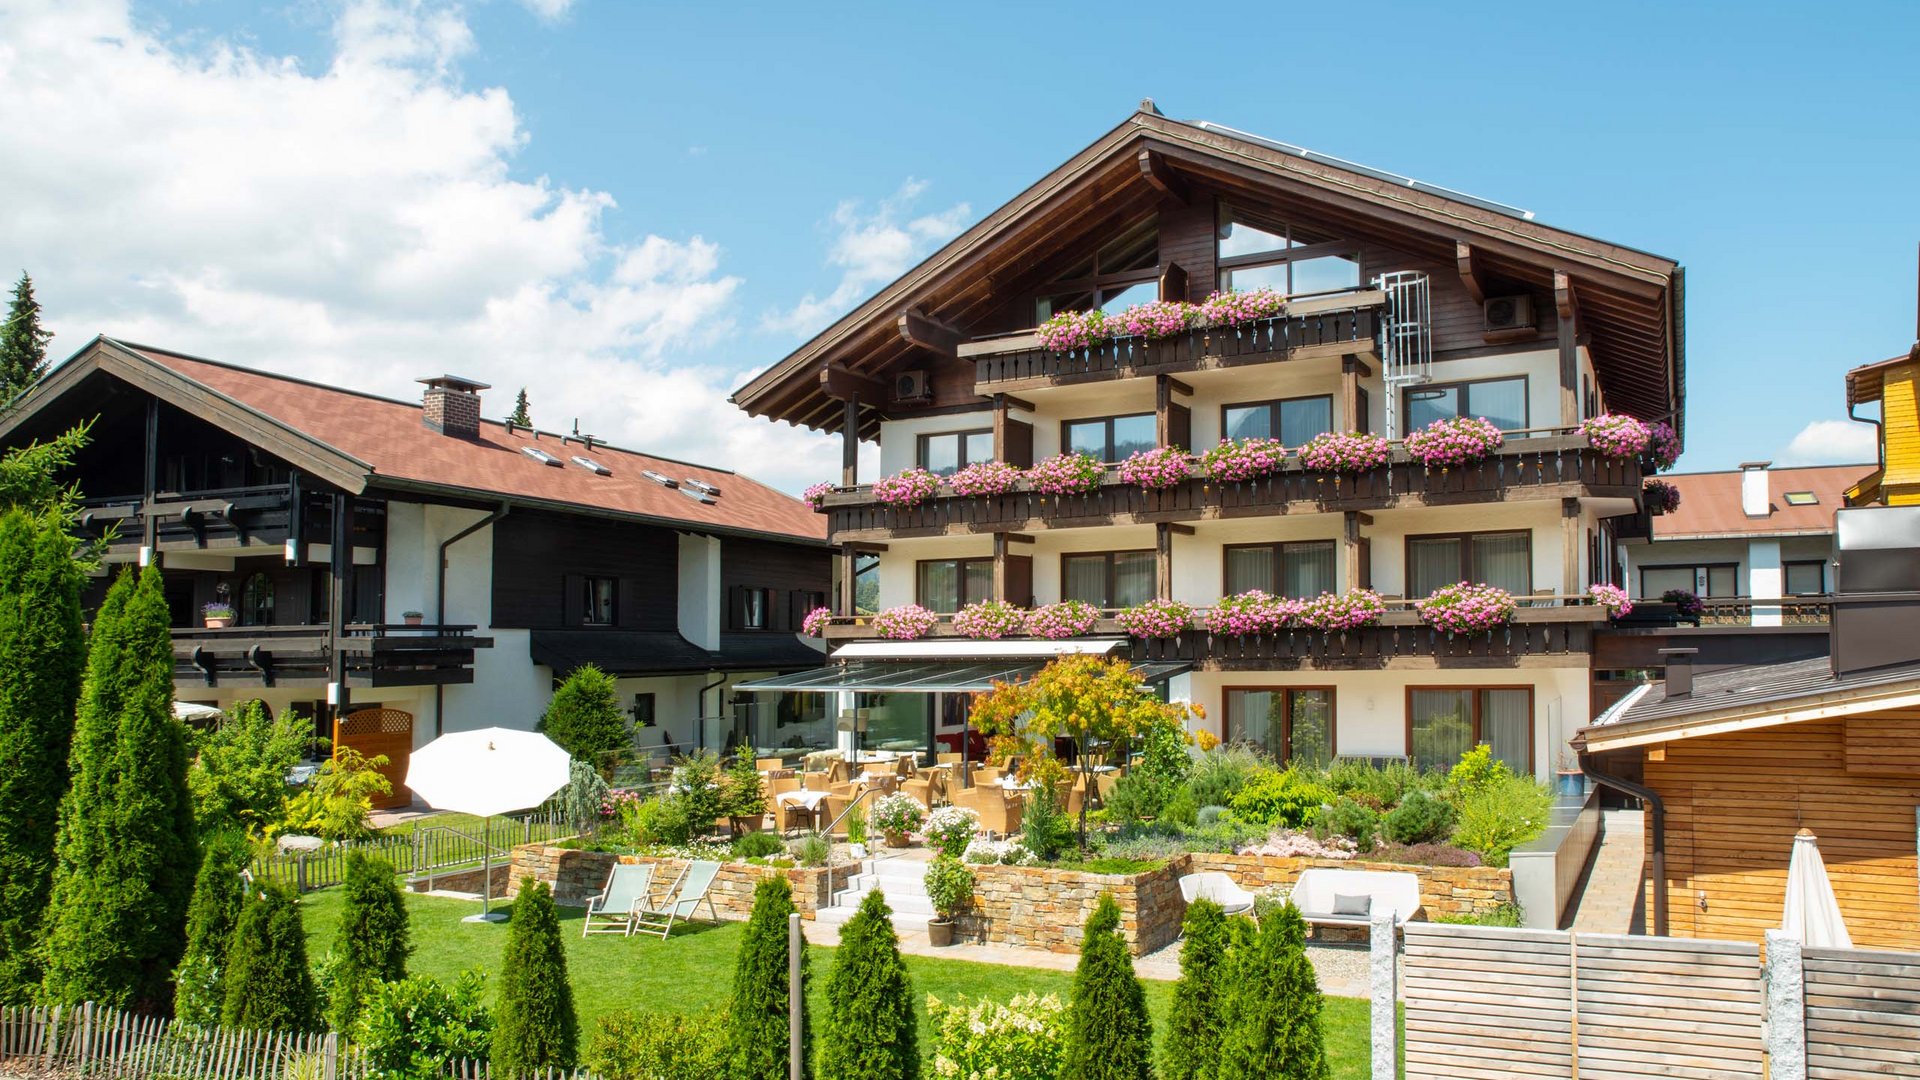 Hahnenköpfle: holiday apartment, lodge & hotel in Oberstdorf